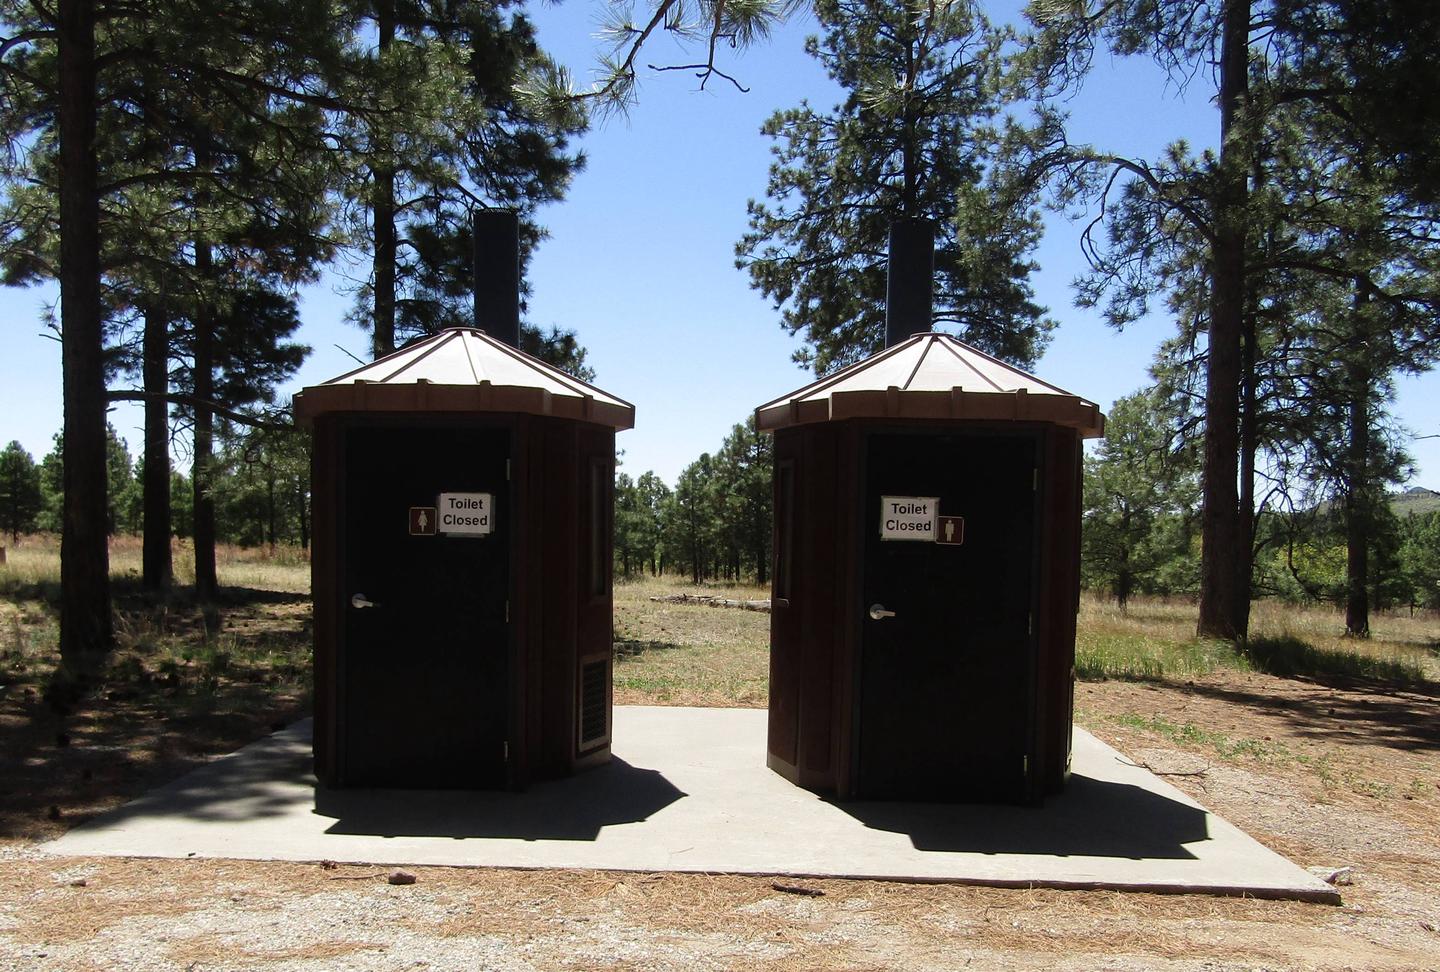 Two vault toilets with pine trees behindVault toilets are present at Ponderosa Group Campground. No running water is available in restrooms. No shower facilities in the park.